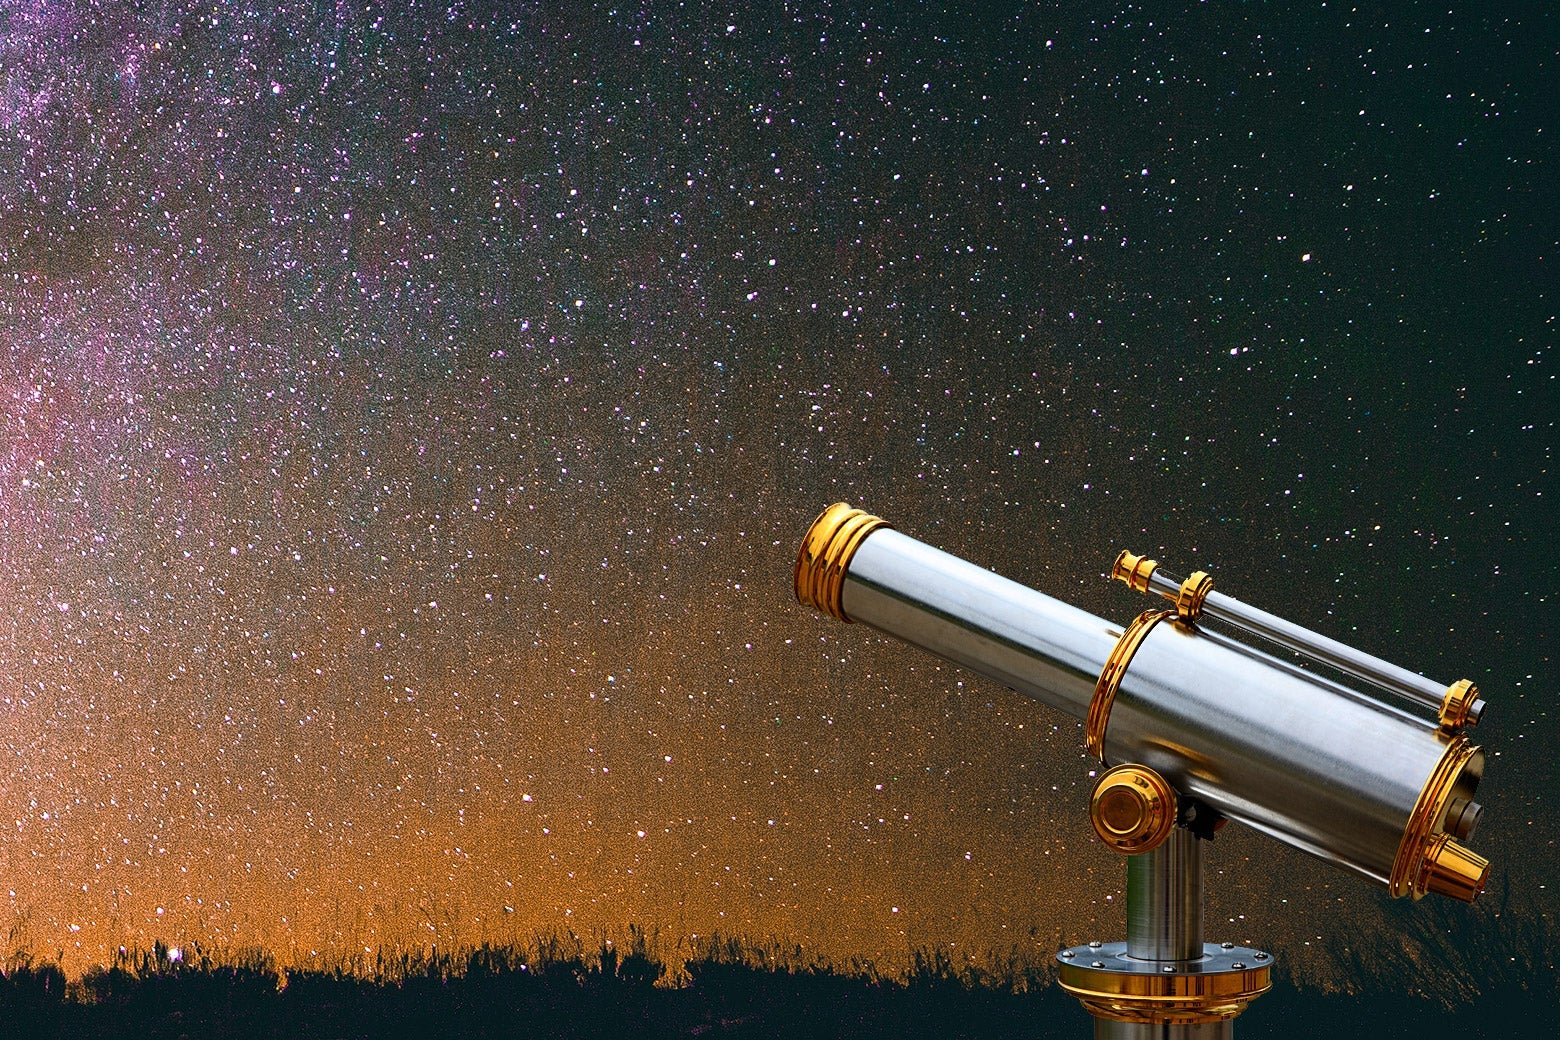 A telescope looking at a starry night sky.